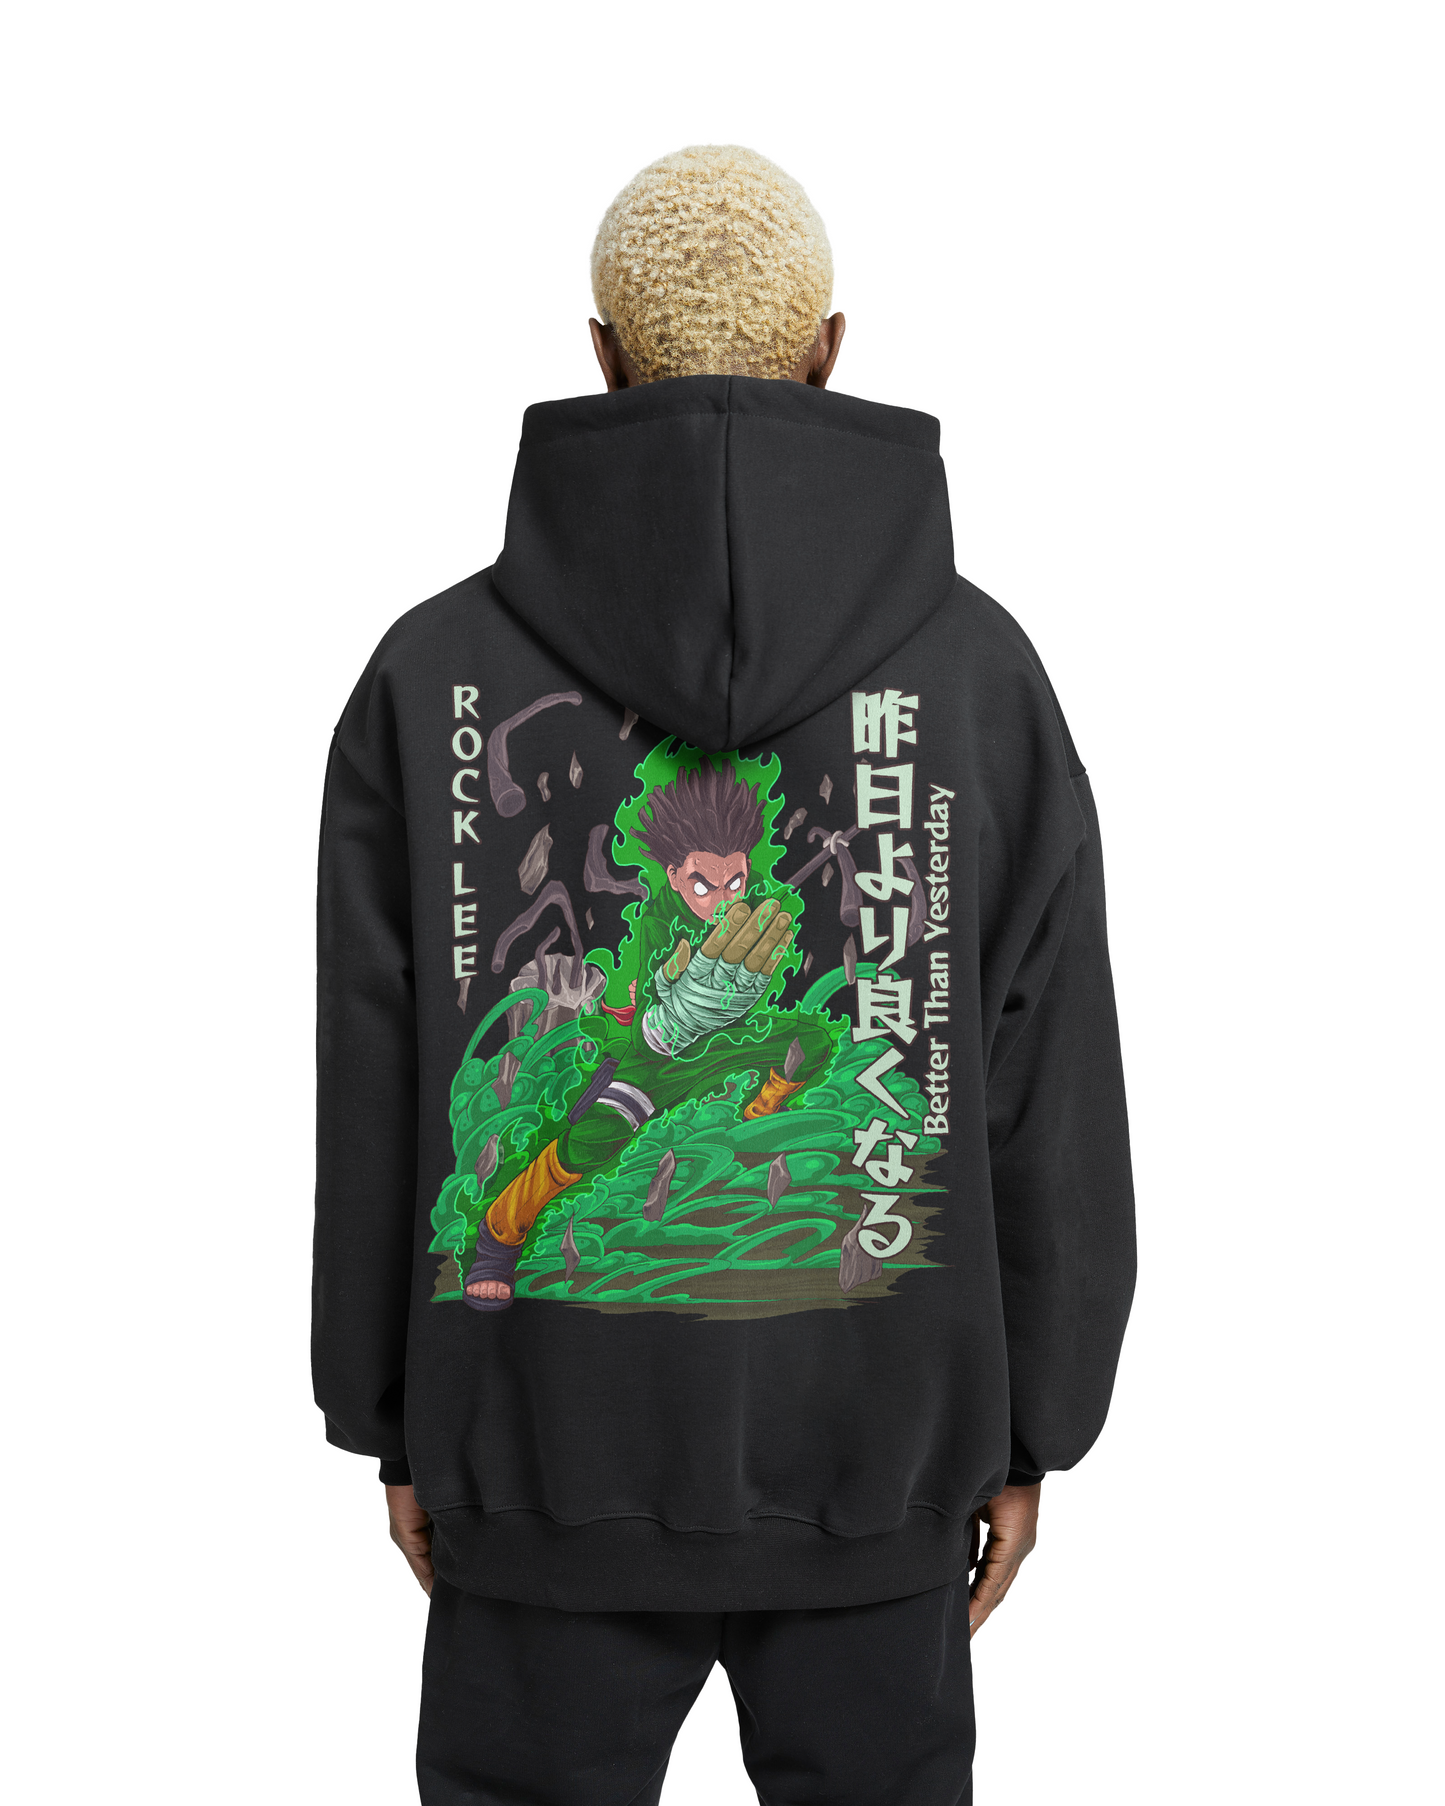 "ROCK LEE x BETTER THAN YESTERDAY" - Oversized Hoodie !SALE!